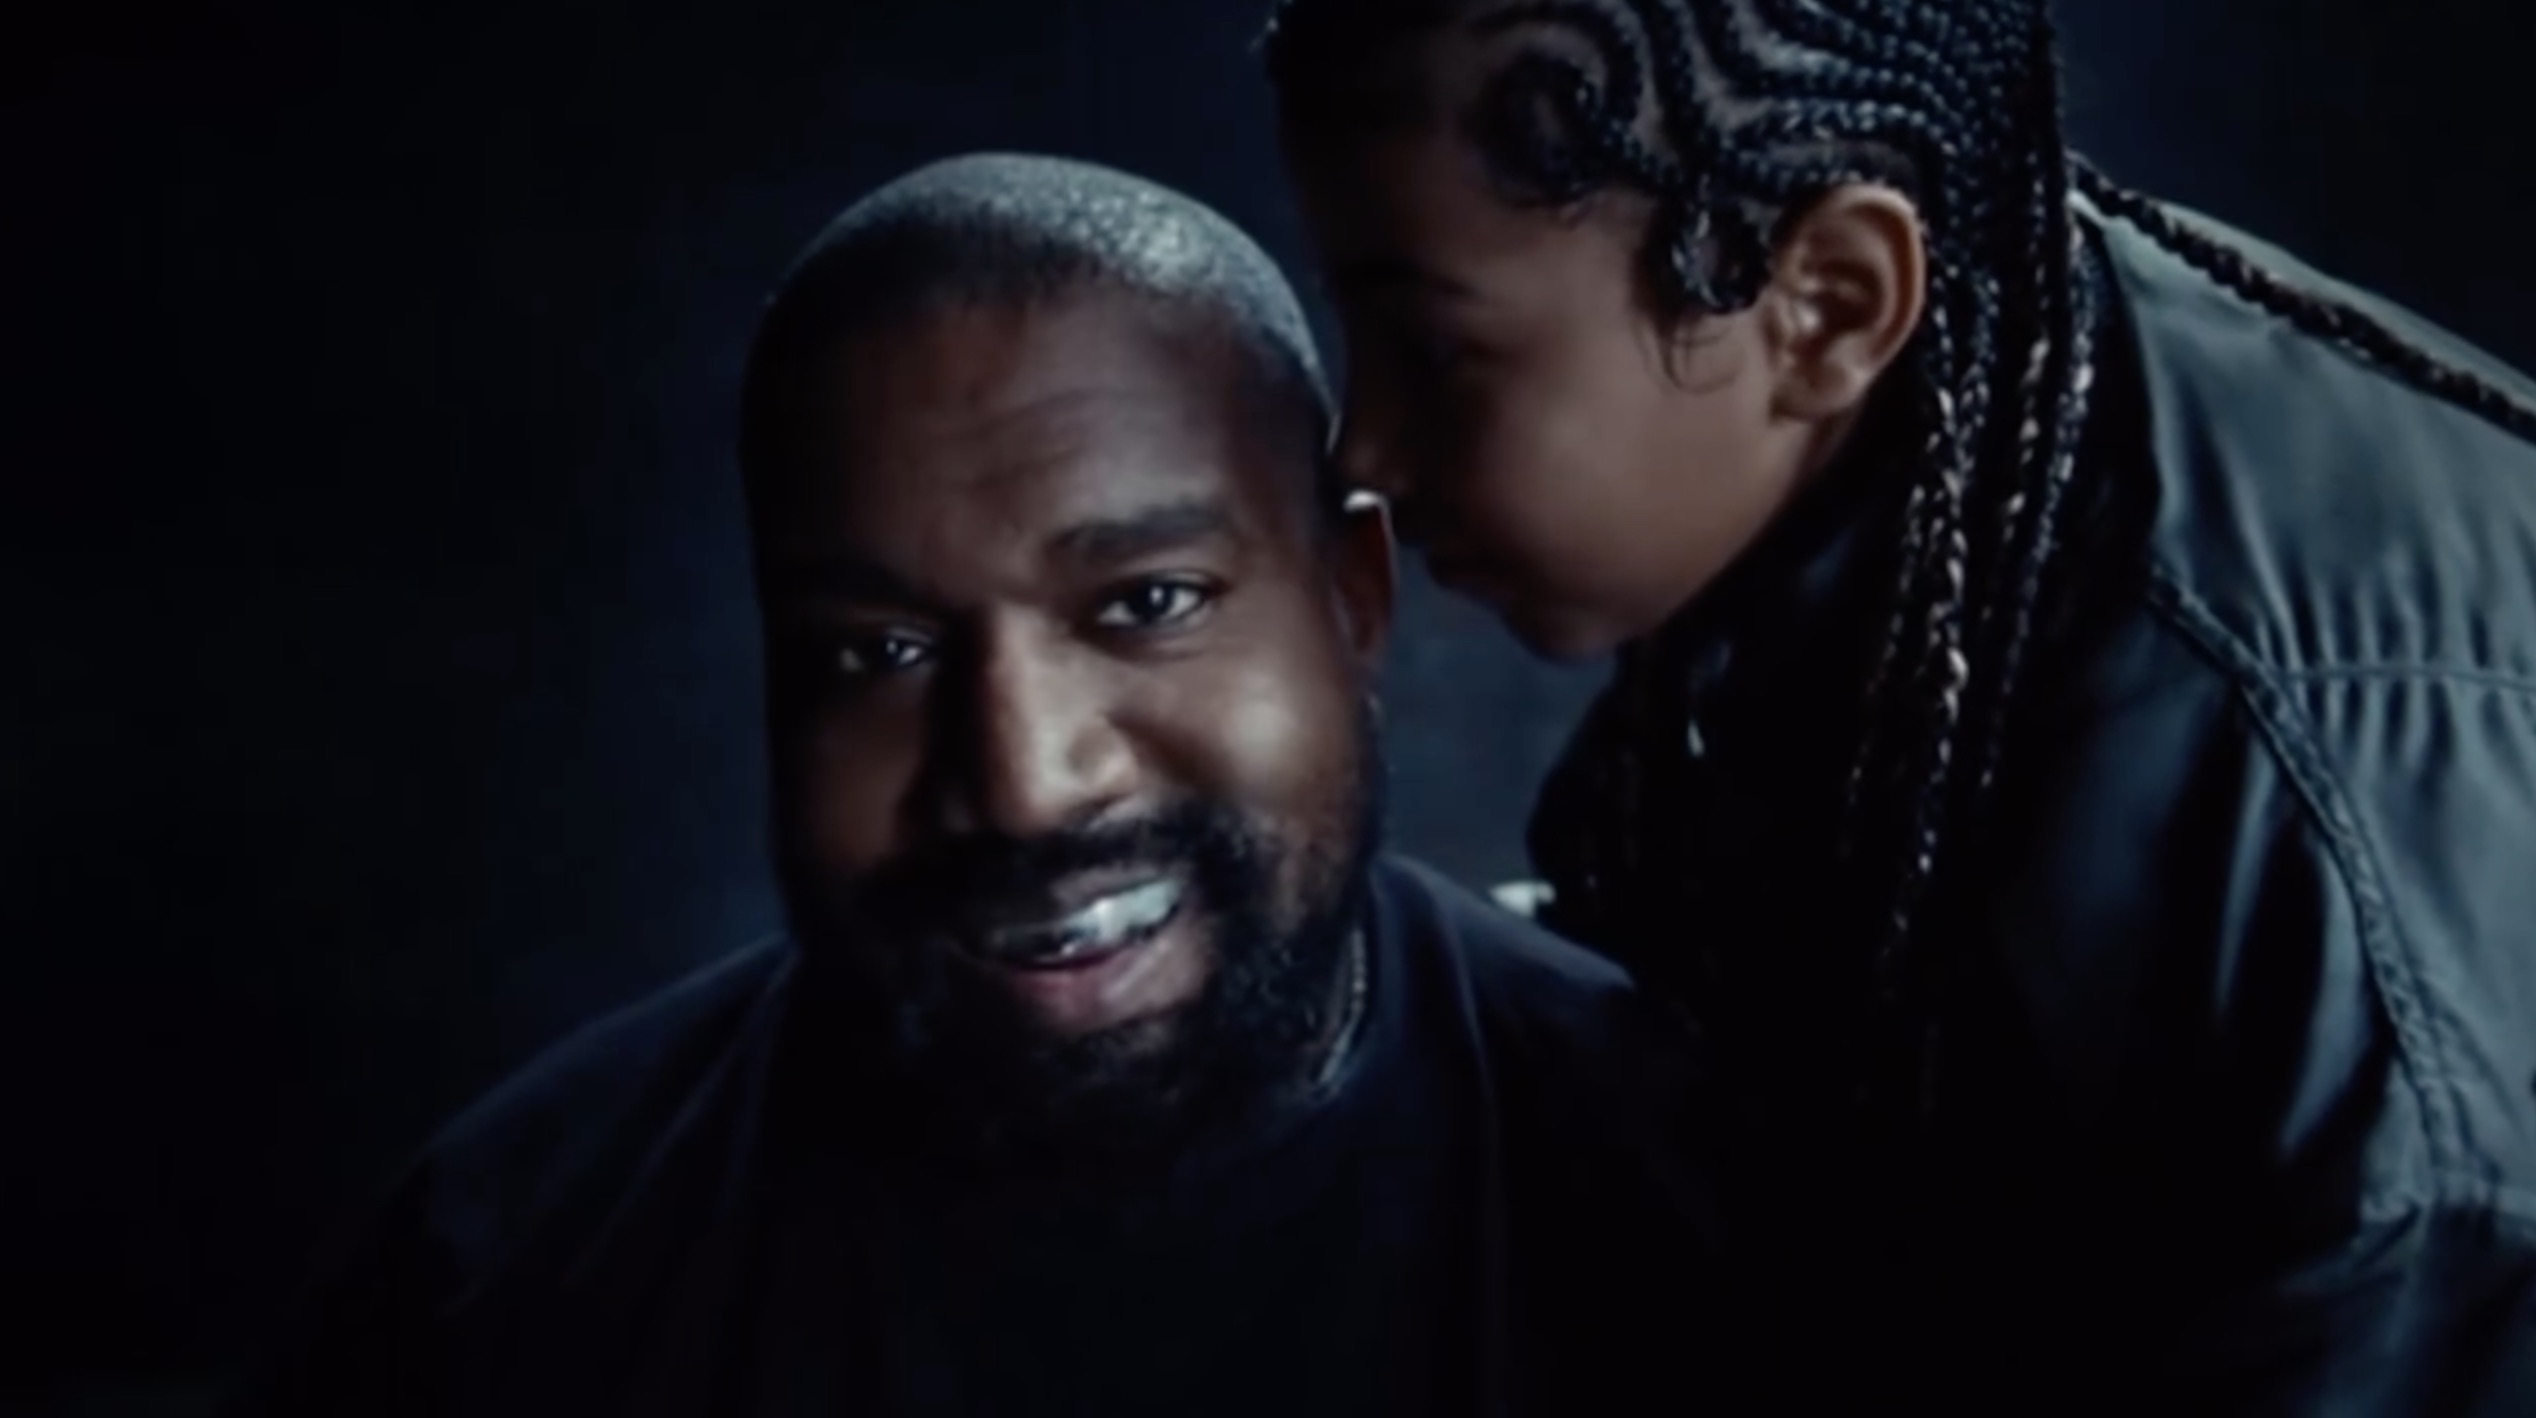 In several shots, North whispered in her dad Kanye's ear as he flashed his new titanium smile